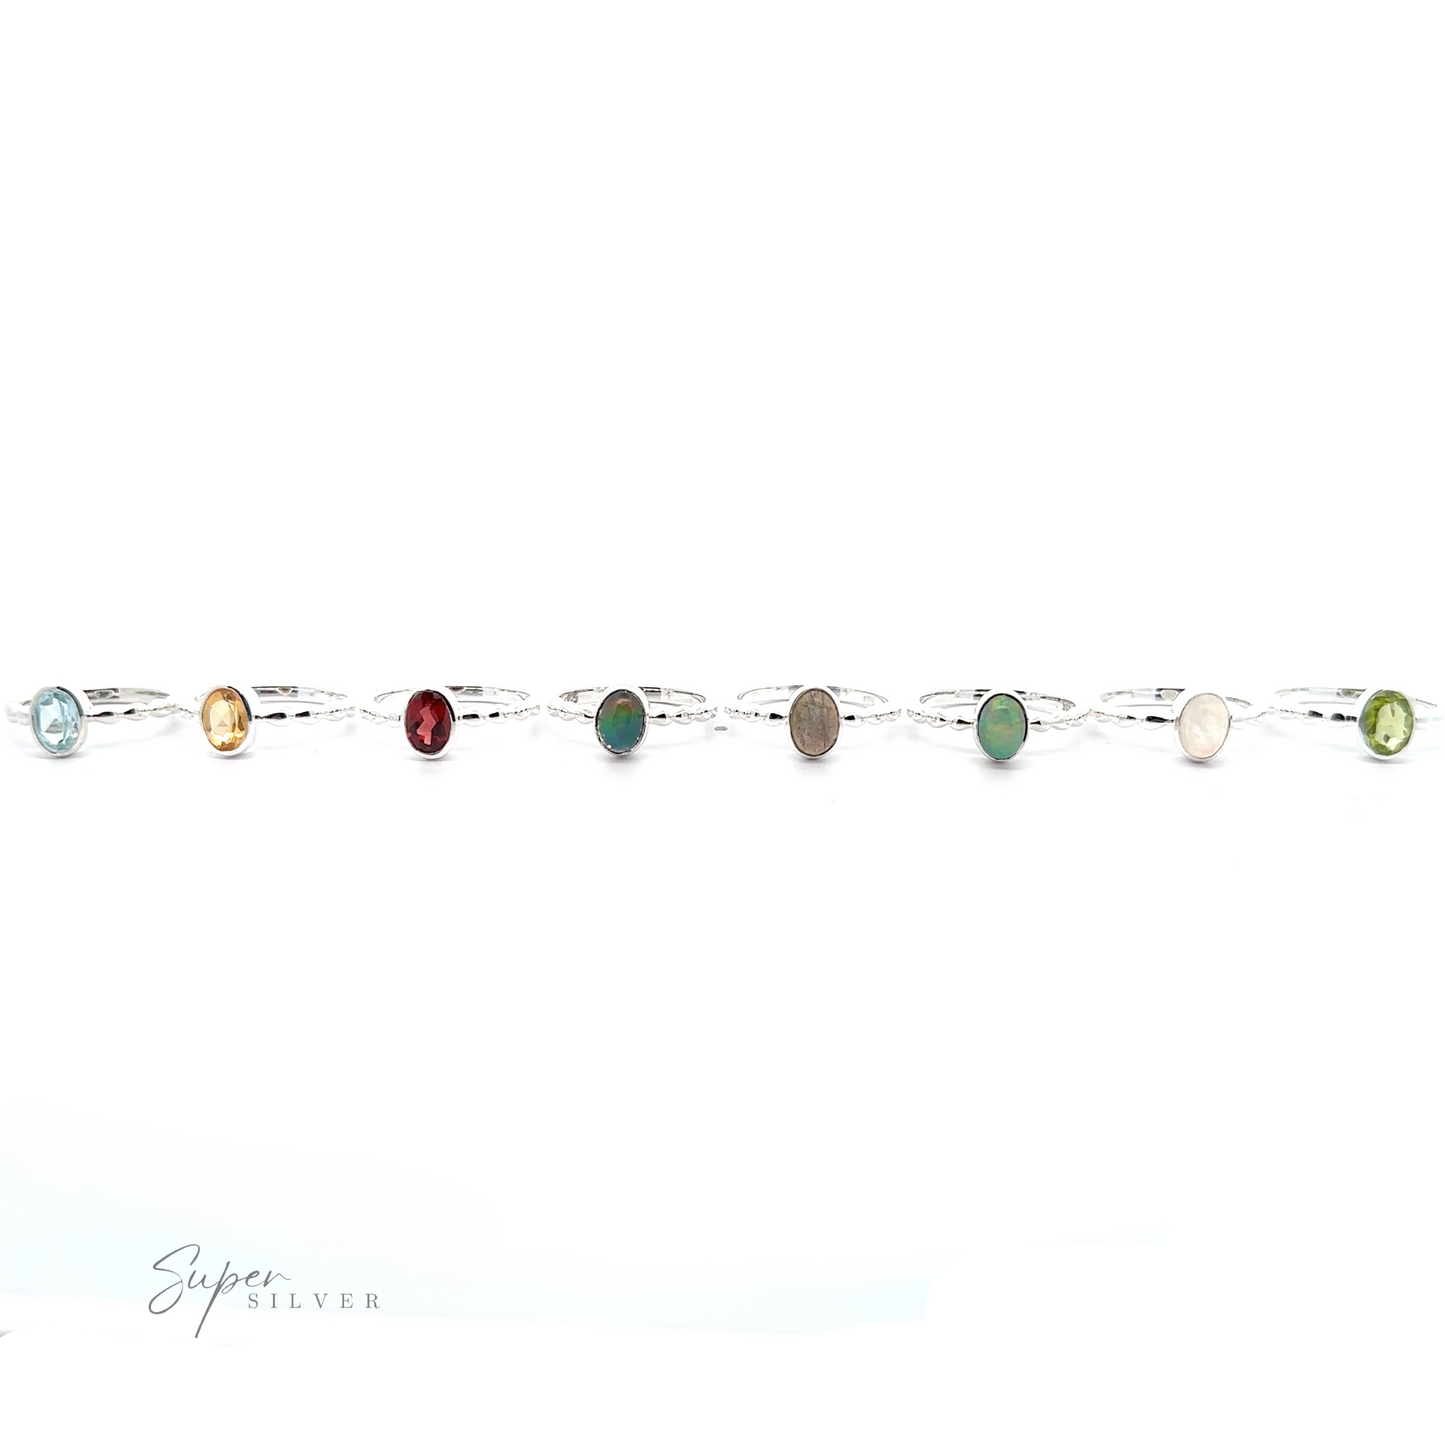 A sterling silver bracelet featuring a Oval Gemstone Ring with Beaded Band in various colors, displayed against a white background.